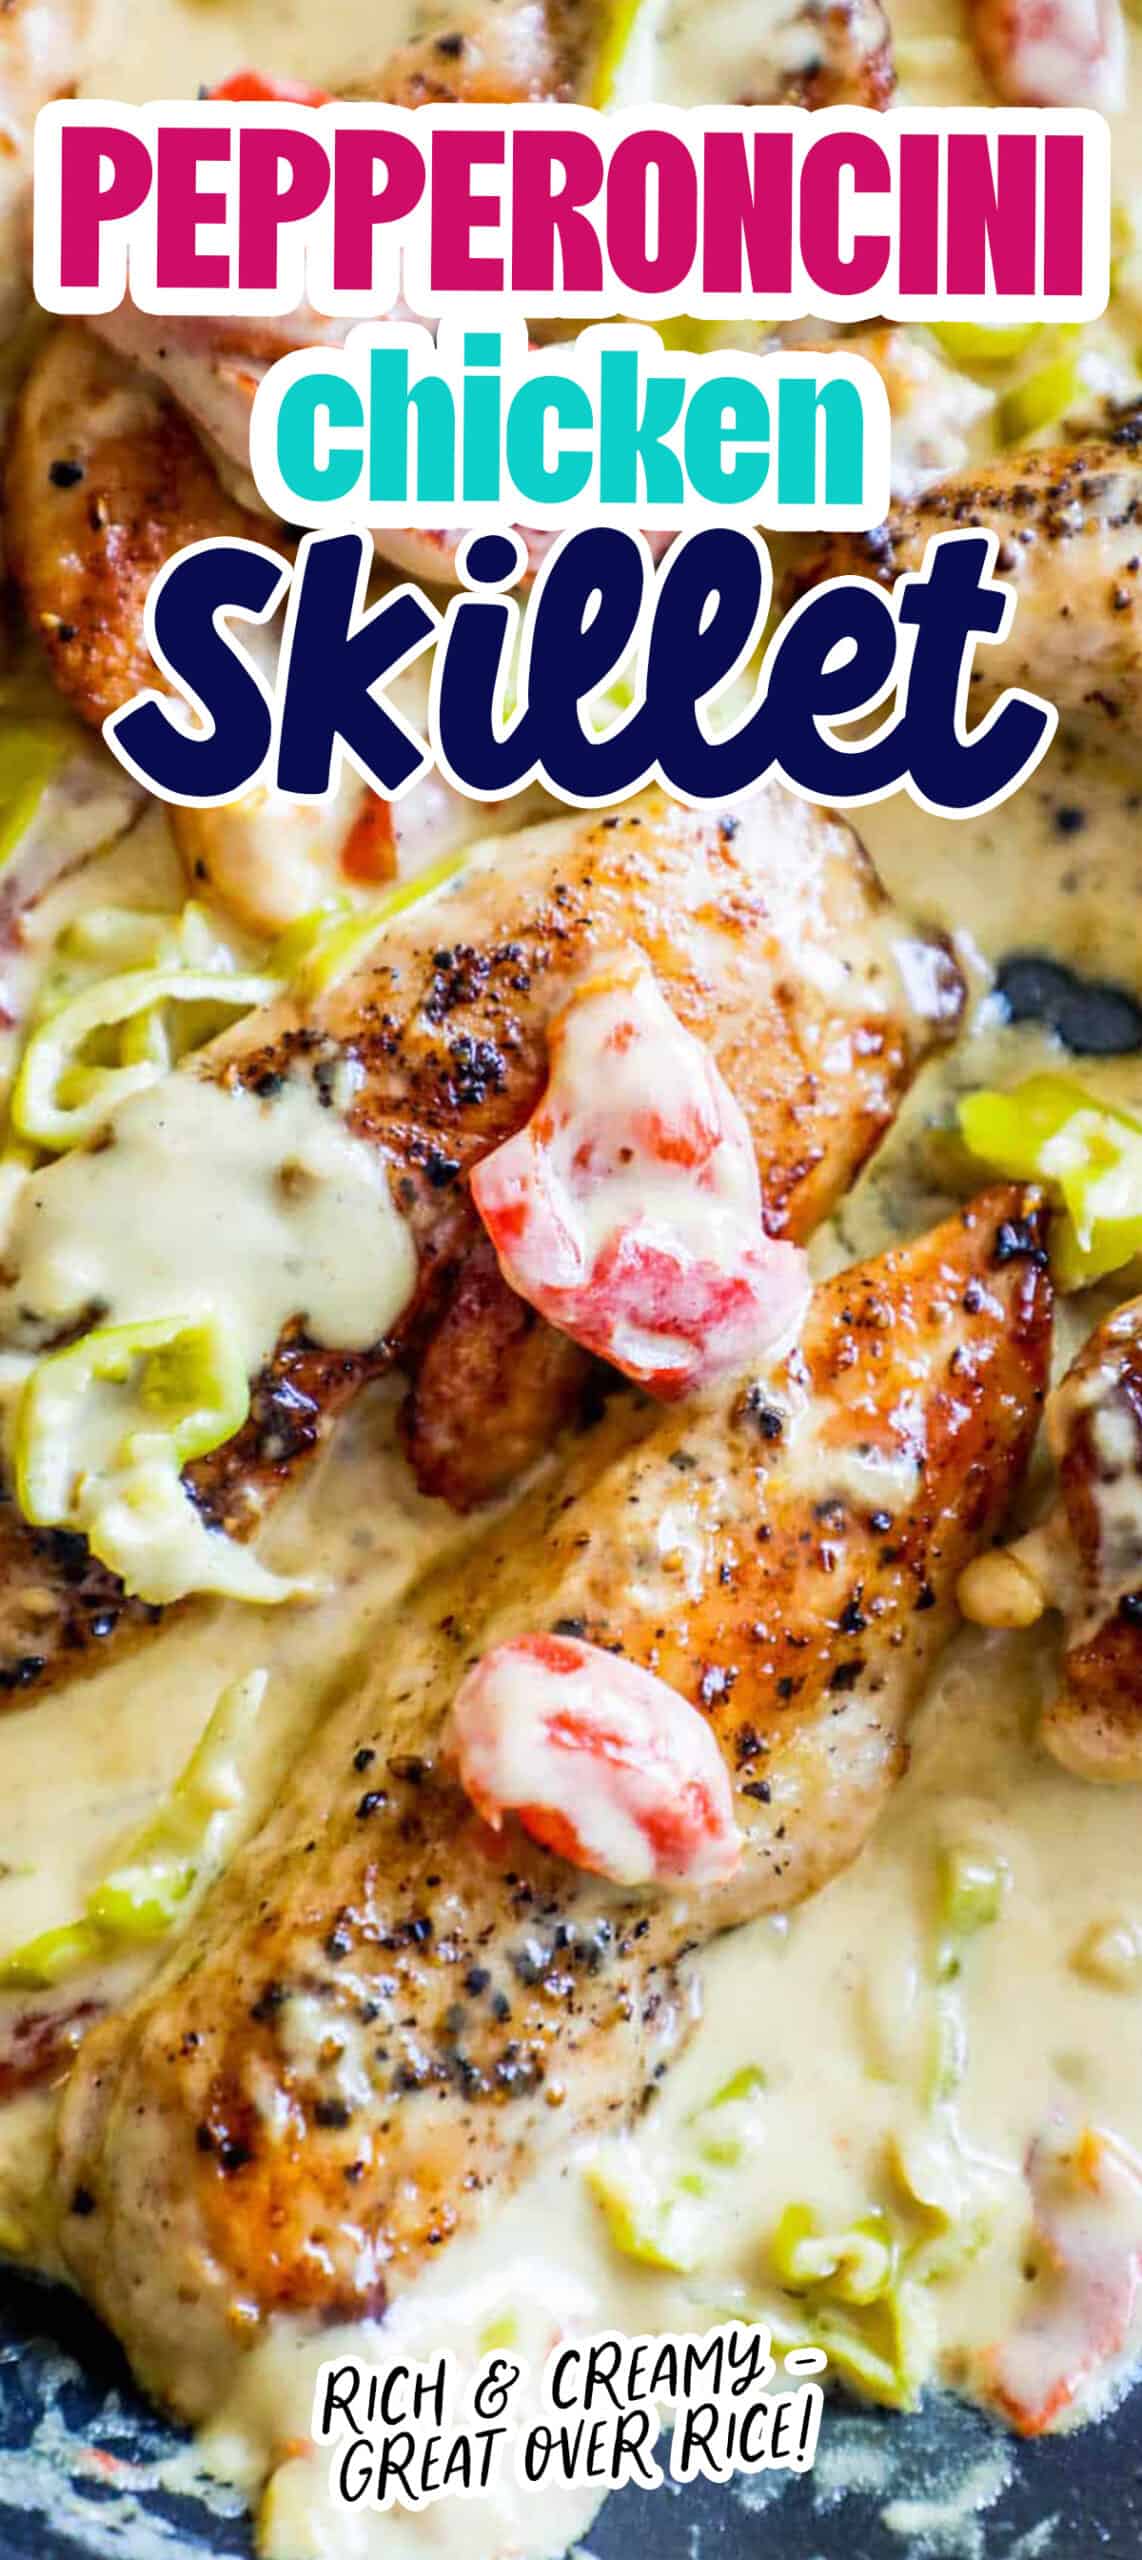 Creamy Pepperoncini Chicken Skillet is a delicious dinner option that features tender chicken cooked in a creamy pepper sauce.